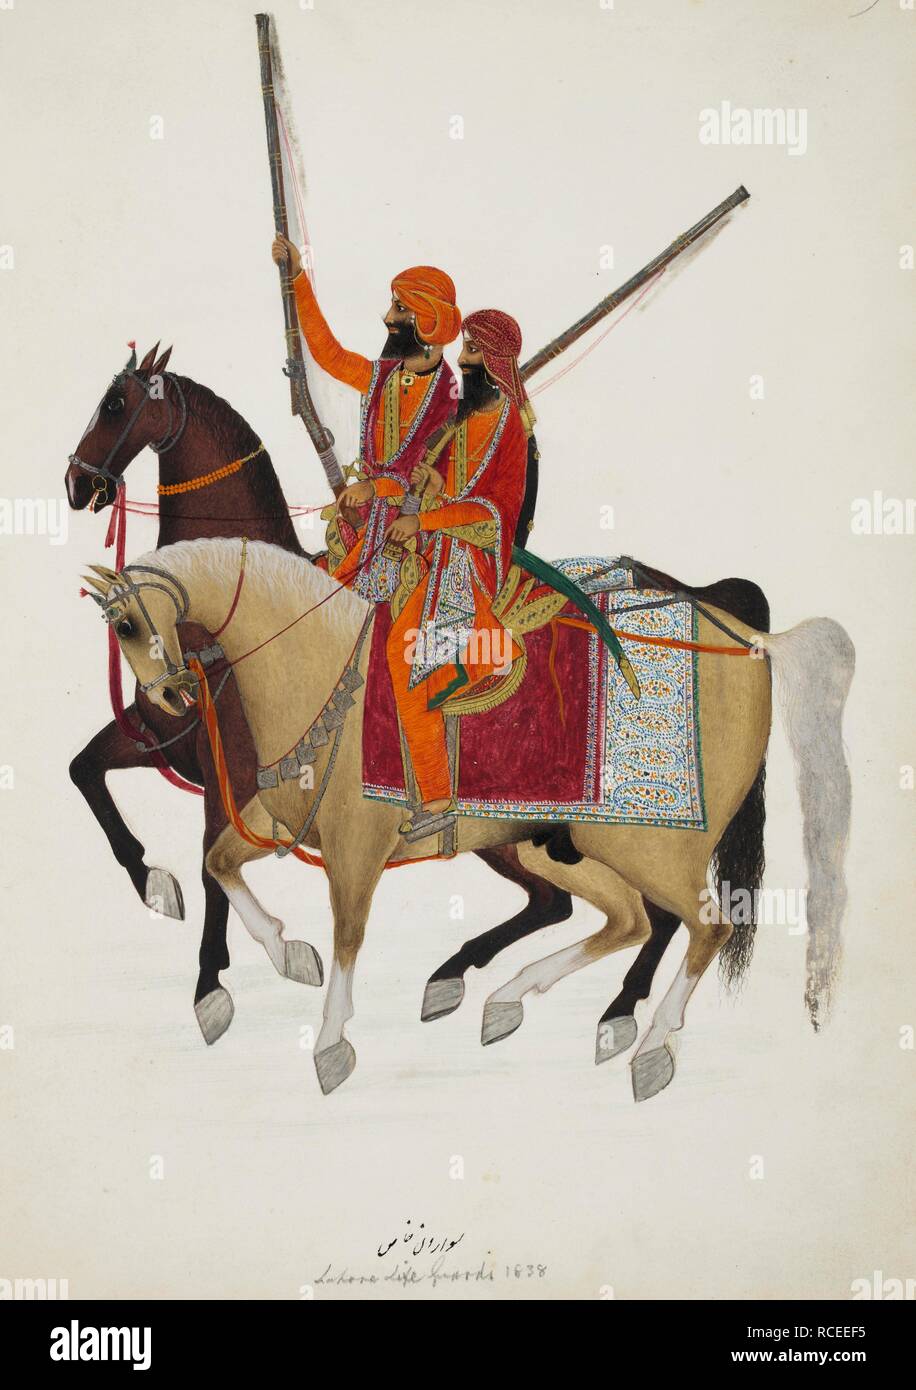 Bodyguard of Ranjit Singh. Two horsemen on richly caparisoned mounts. Inscribed in Persian characters: 'Sawardan i khass'; in English 'Lahore Life Guards 1838'. 1838-1839. Pencil and watercolour. Source: Add.Or.1385. Stock Photo